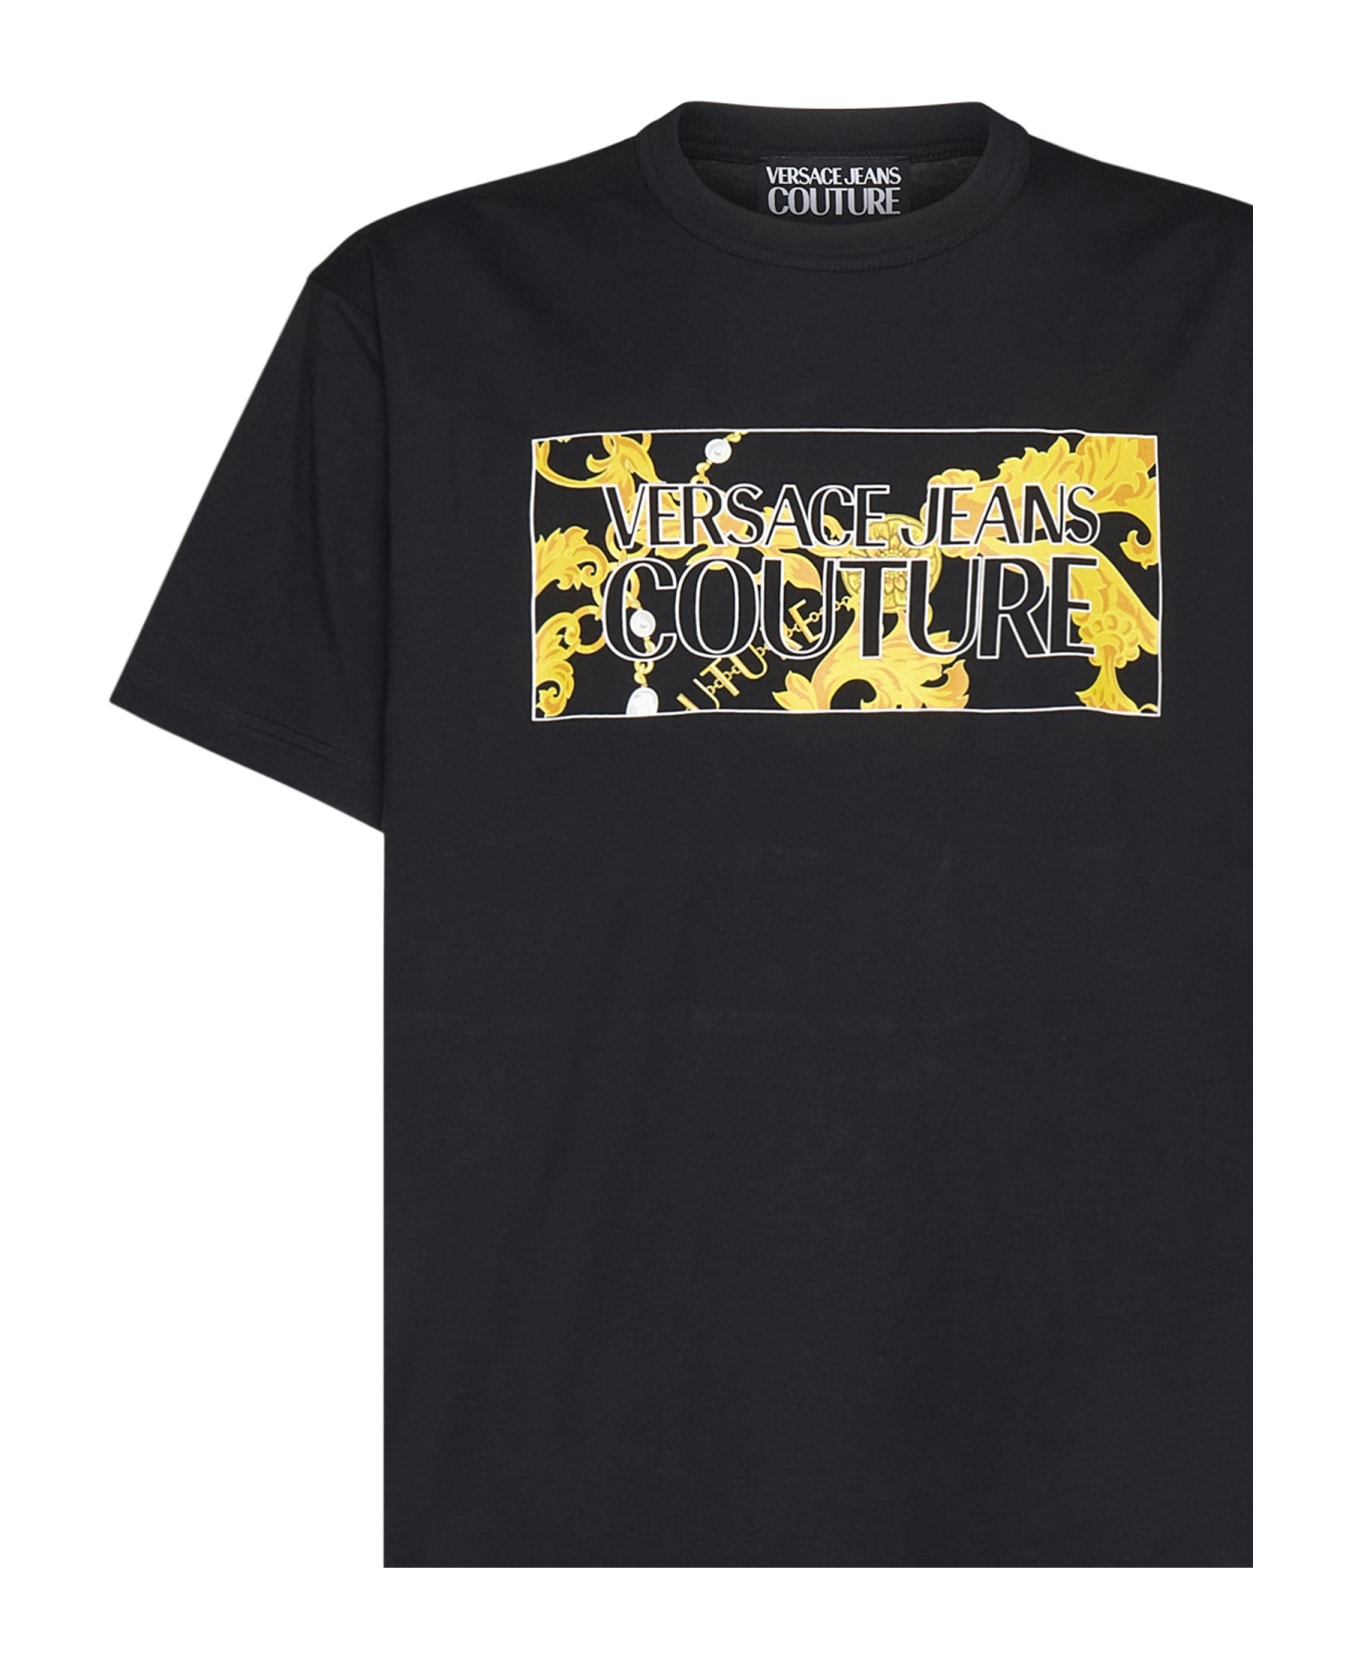 Versace Jeans Couture Versace Chain Couture T-shirt - Black gold シャツ